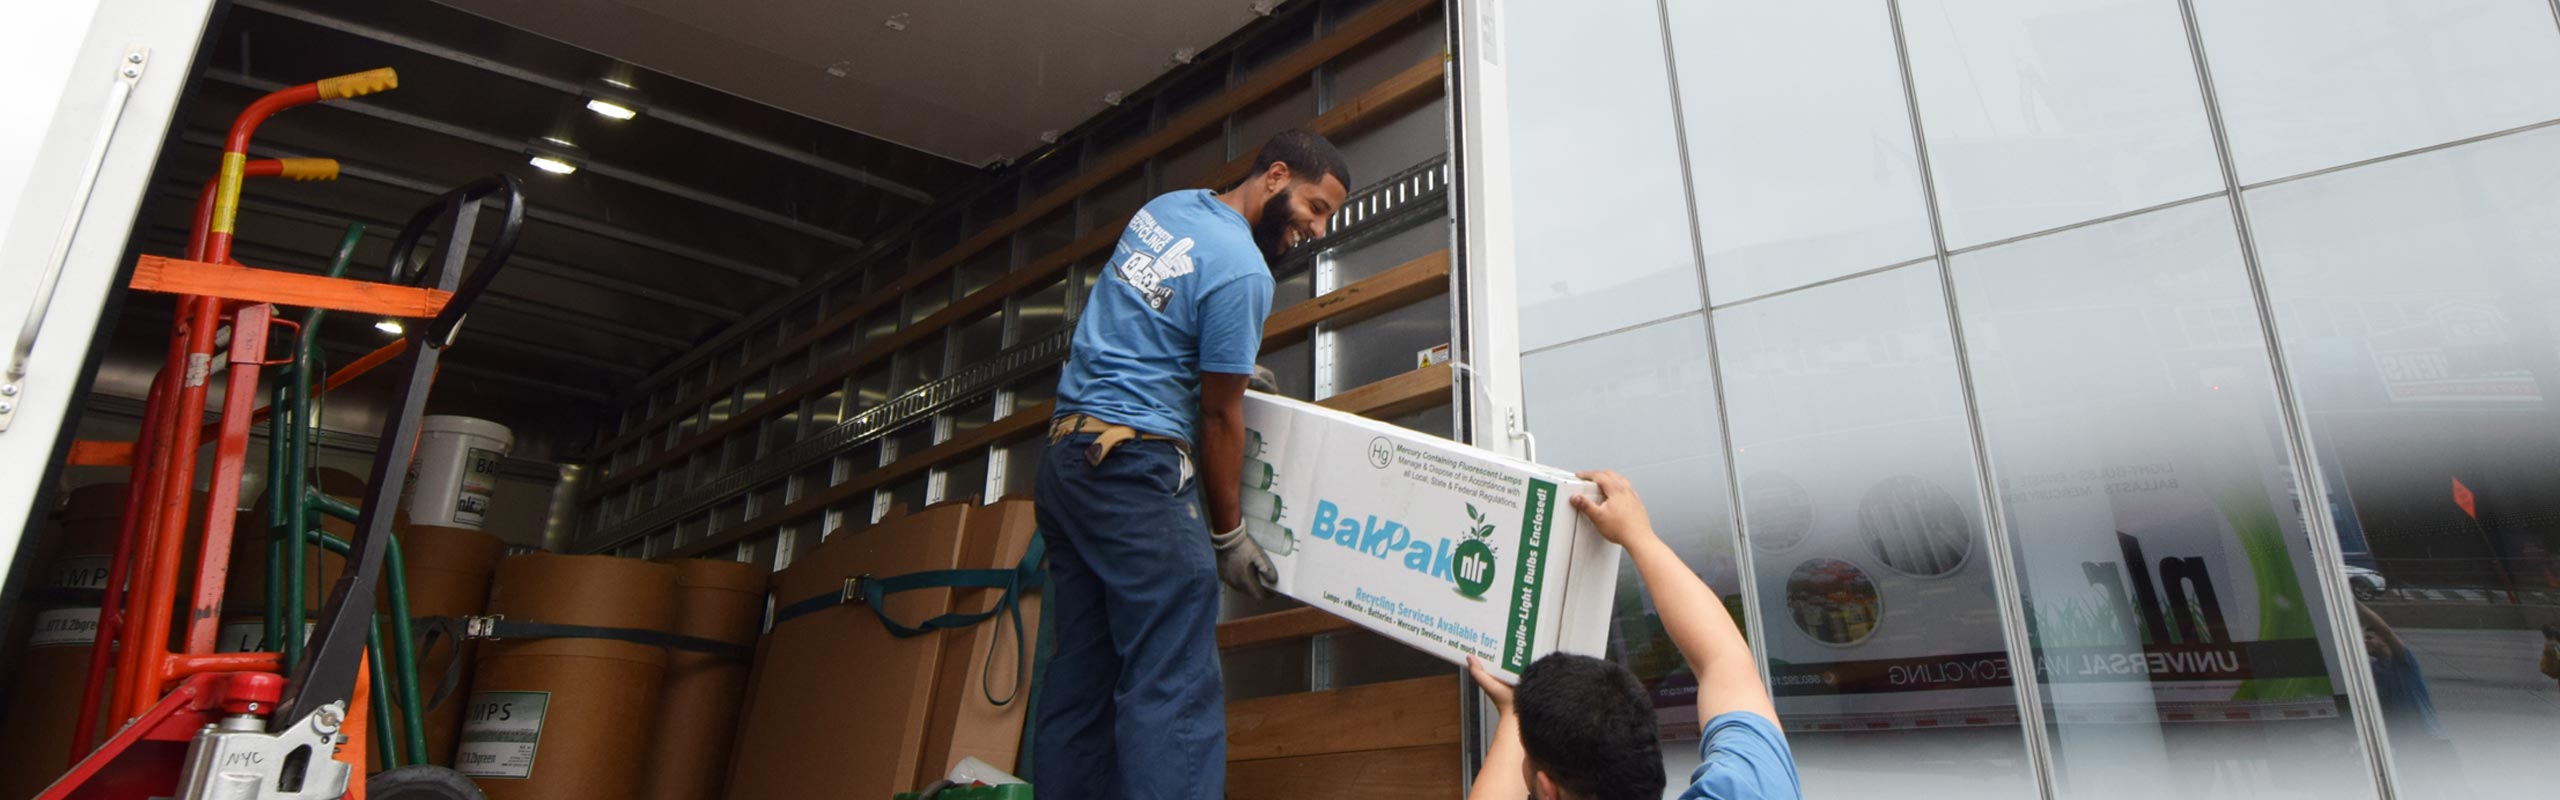 A picture of two of NLR's drivers moving a mailback box in New York City. NLR offers pick up and mailback programs for recycling lamps, batteries, electronic waste, and other universal waste.